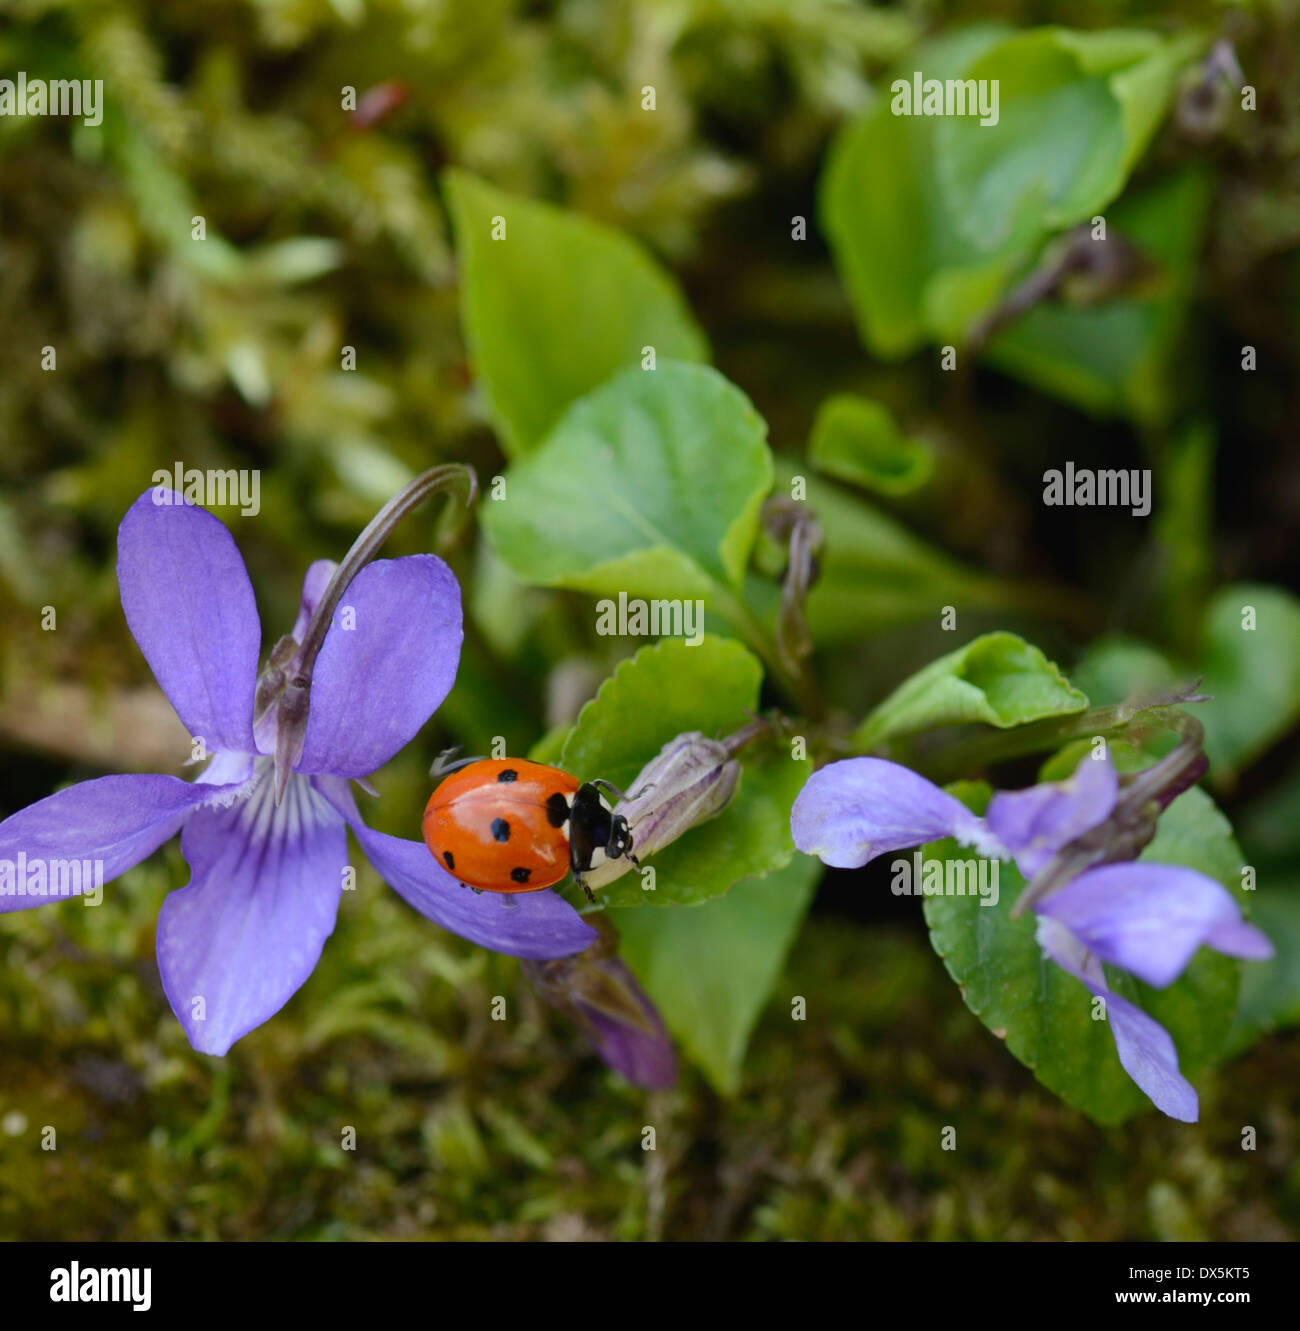 7-Spot Ladybird crawling over Violet flowers Stock Photo